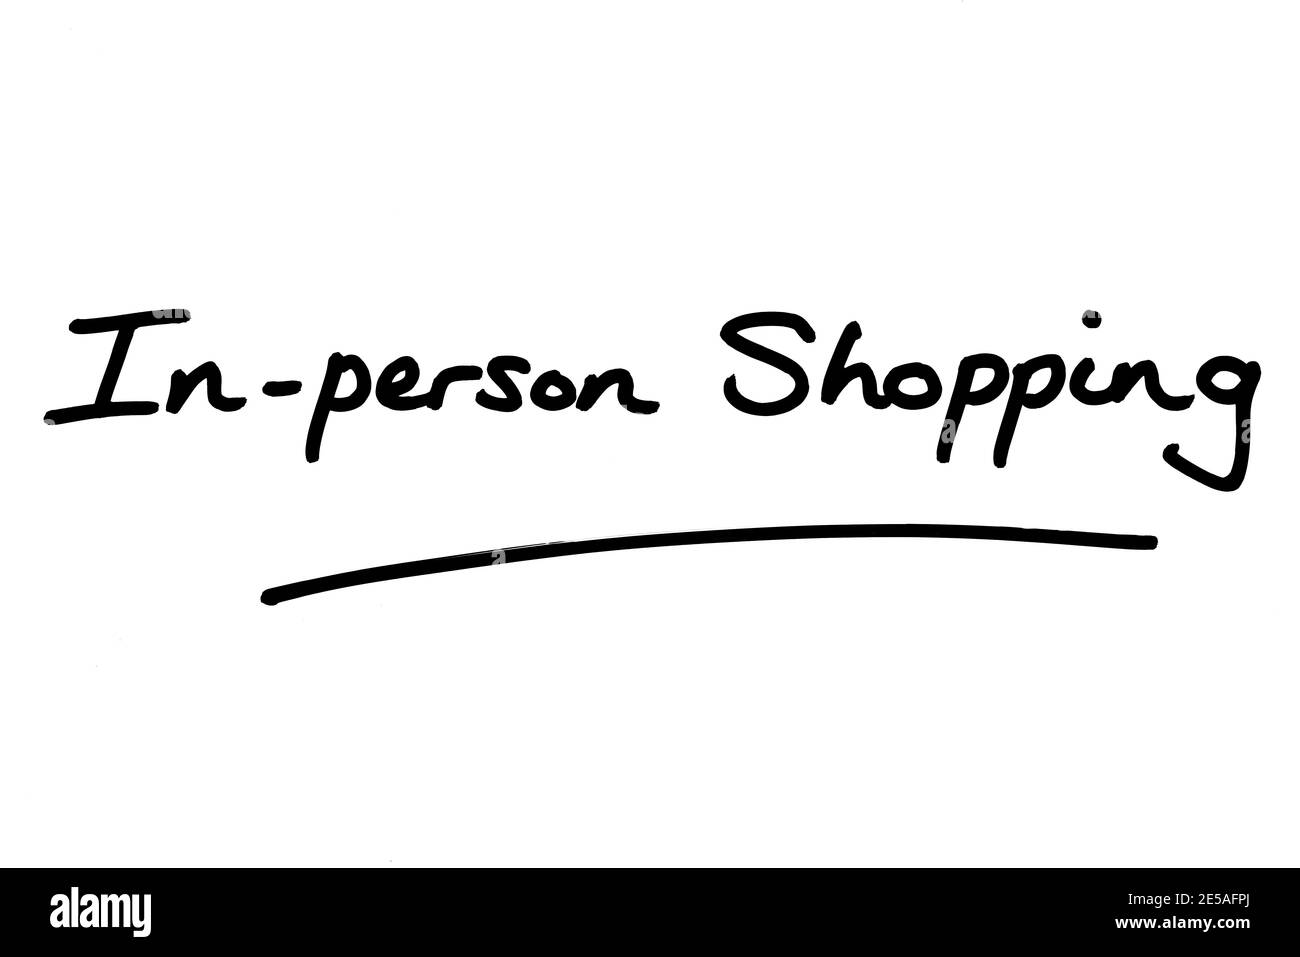 In-Person Shopping, handwritten on a white background. Stock Photo